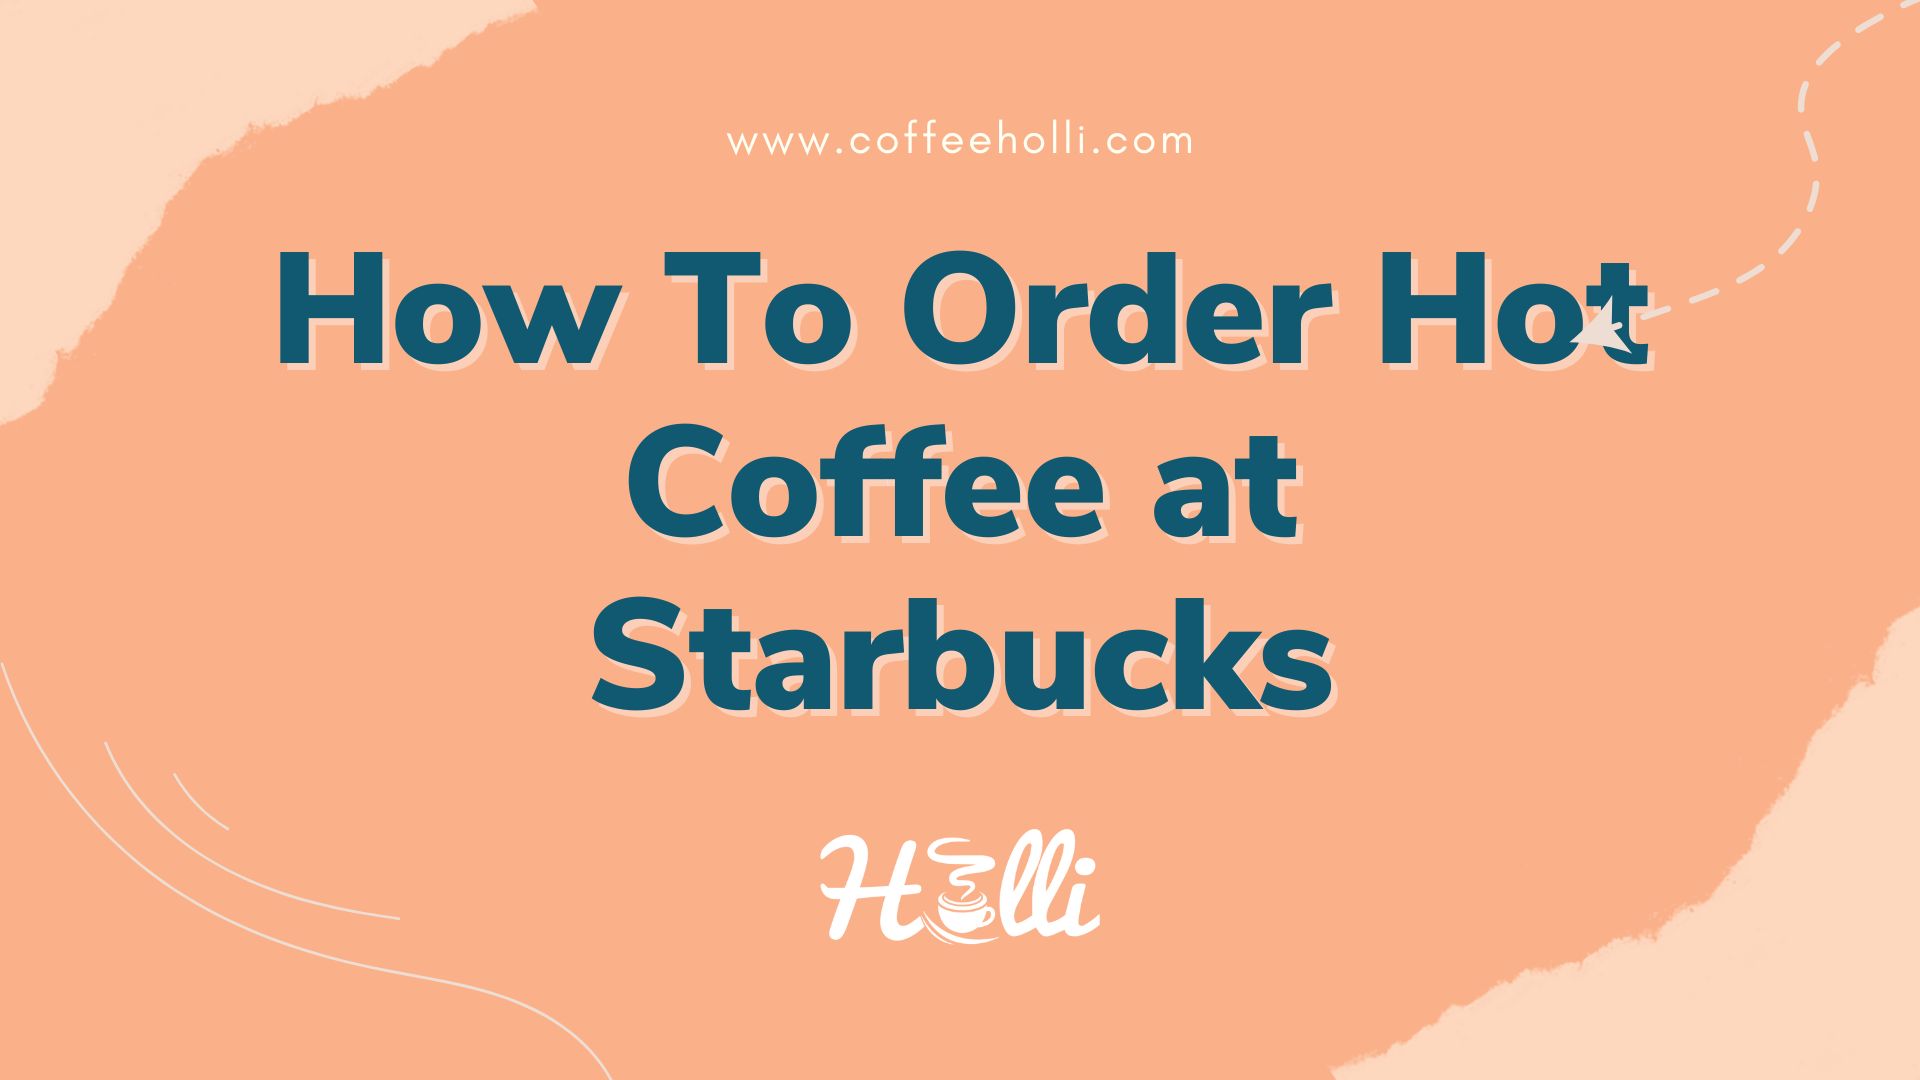 How to Order Hot Coffee at Starbucks